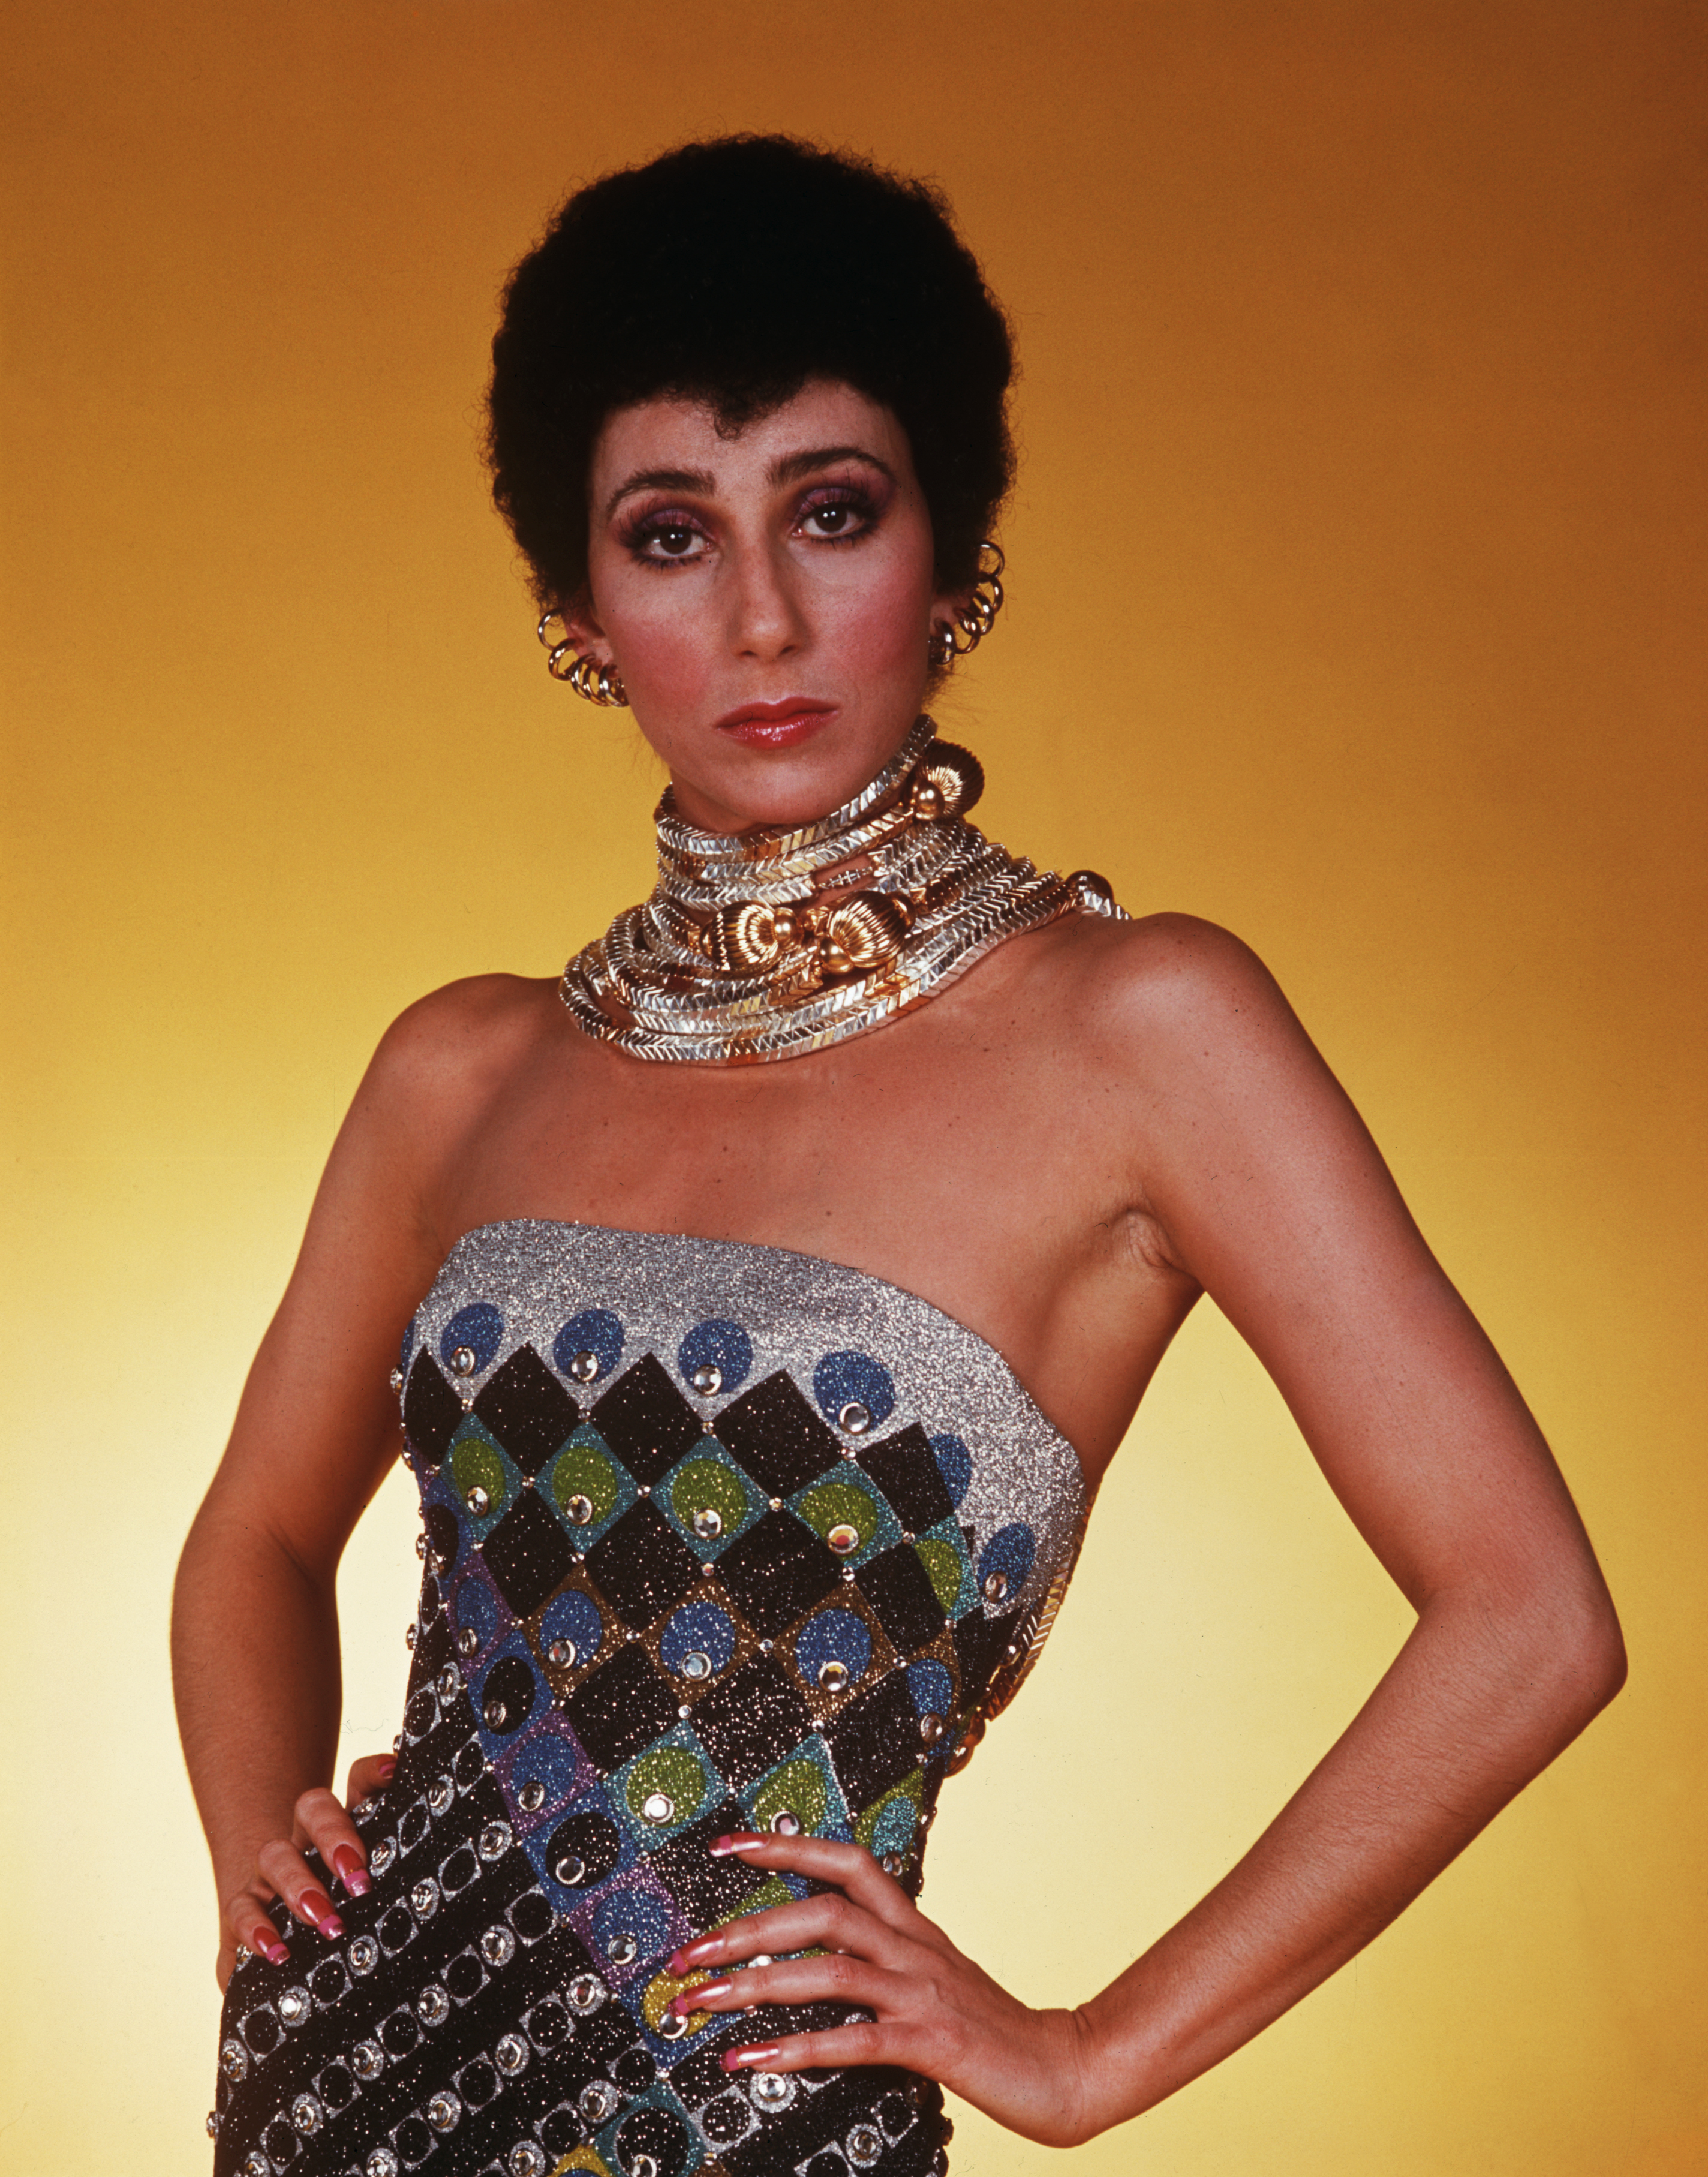 Cher on her TV show, "The Sonny and Cher Comedy Hour" in 1975 | Source: Getty Images